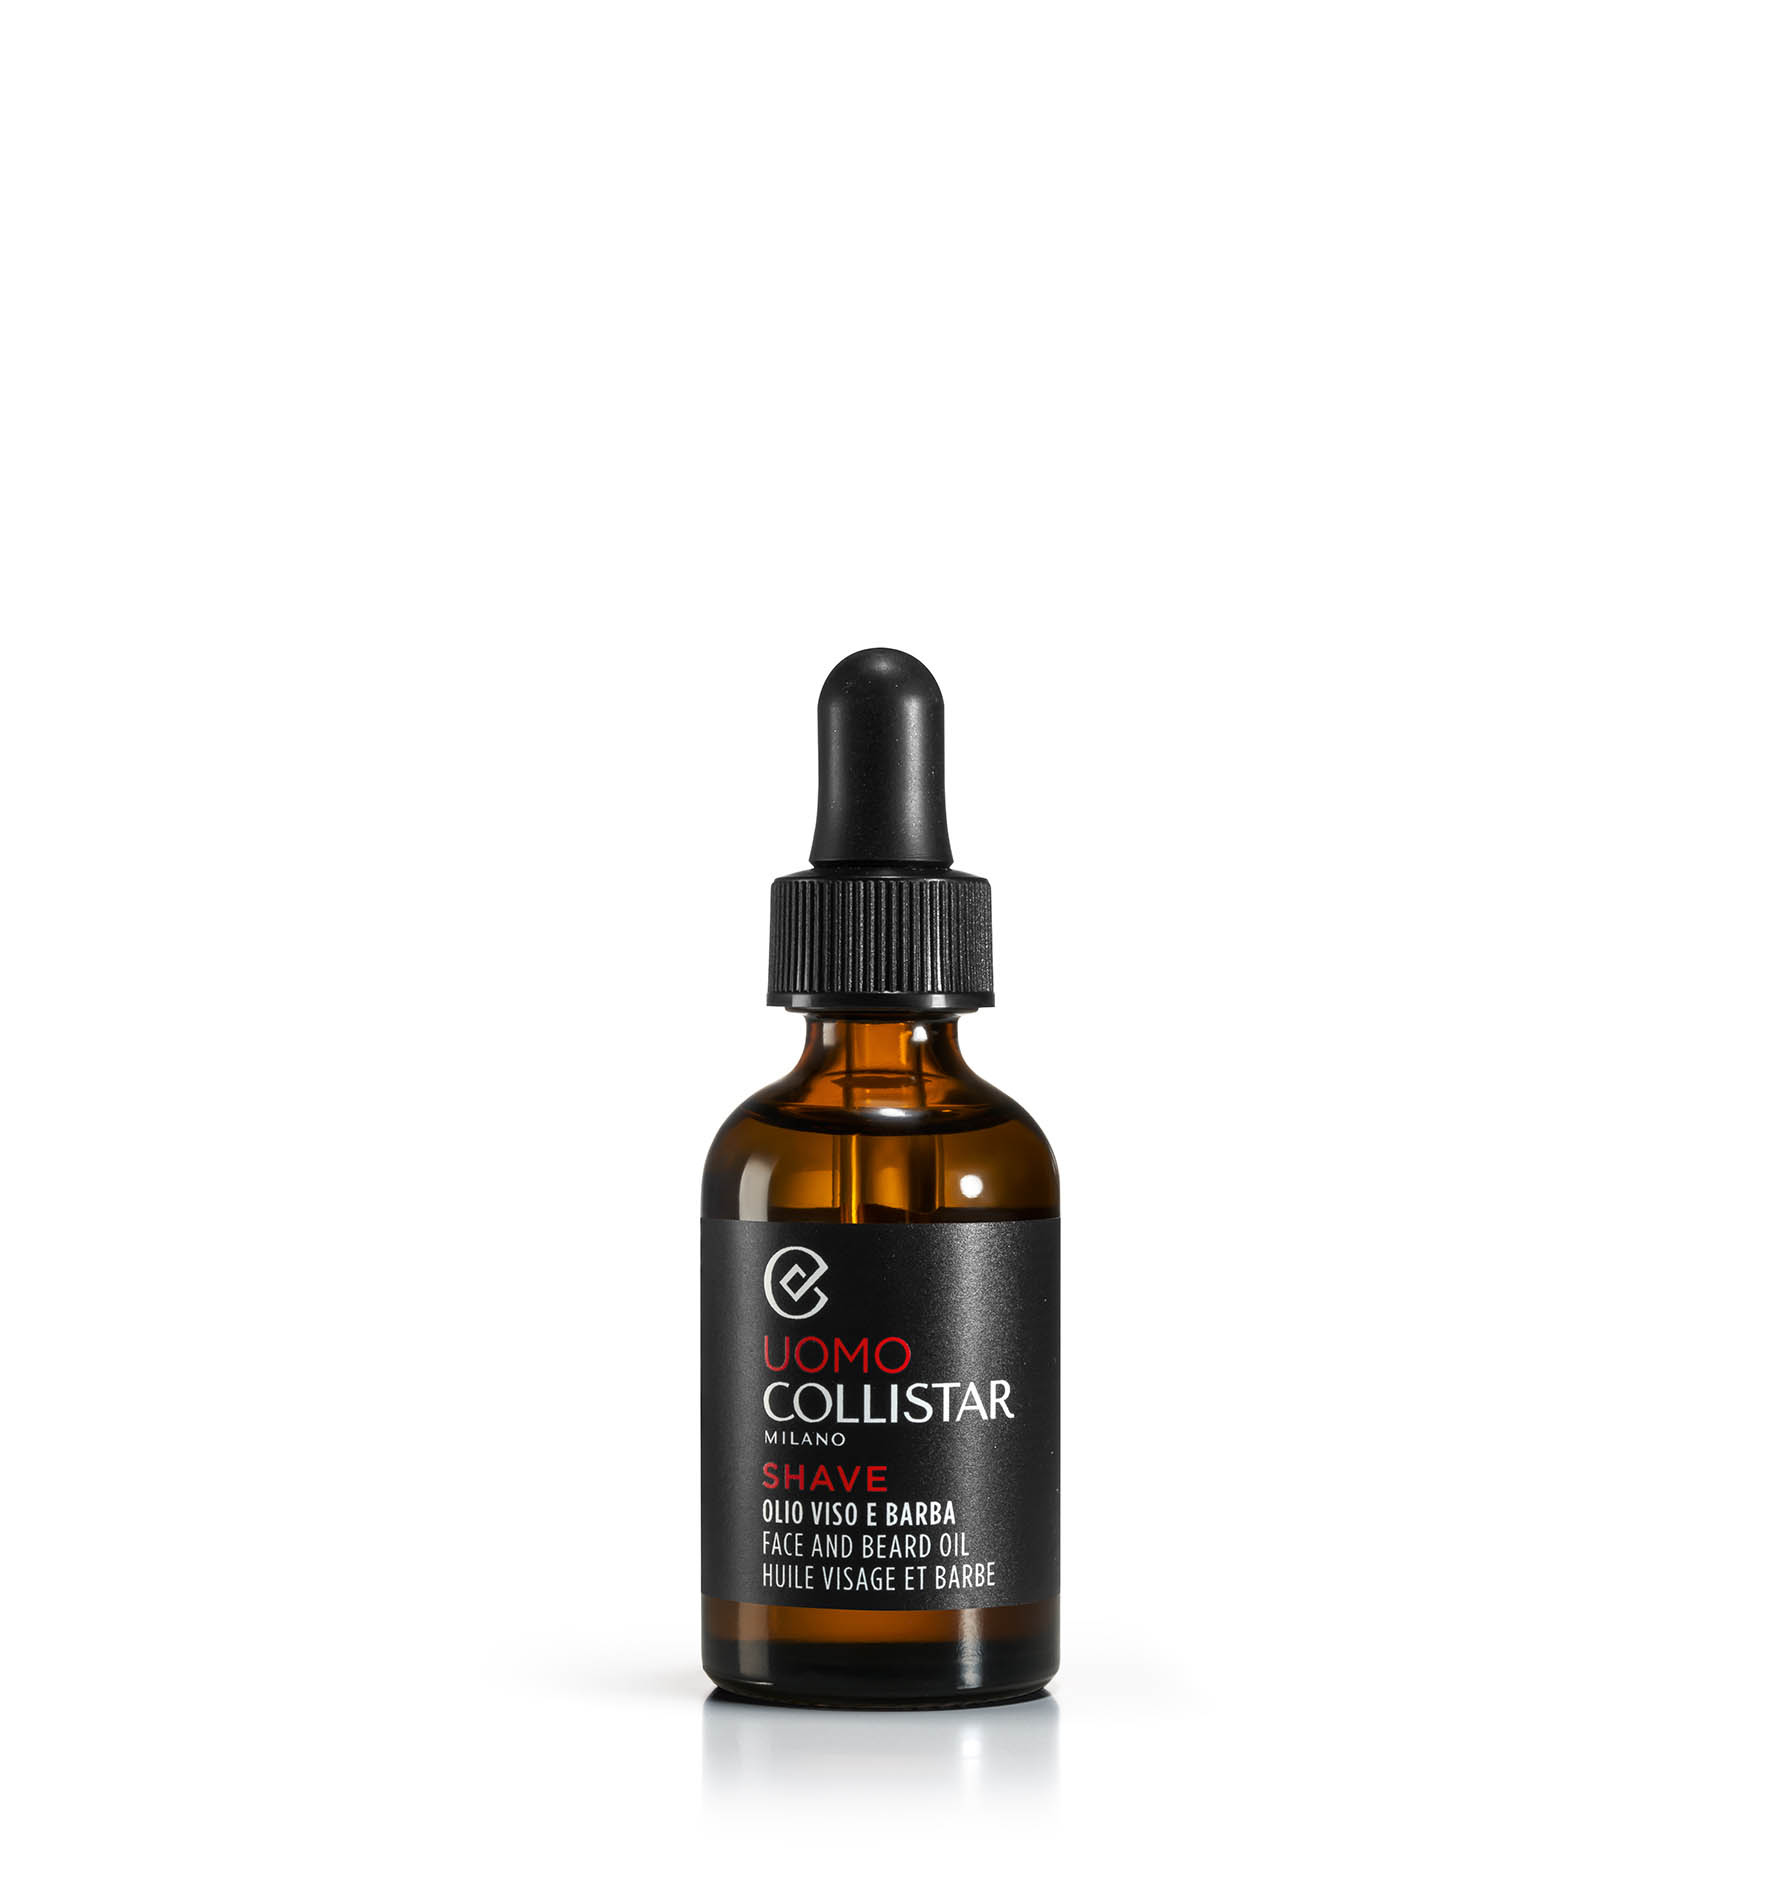 FACE AND BEARD OIL - NEW | Collistar - Shop Online Ufficiale